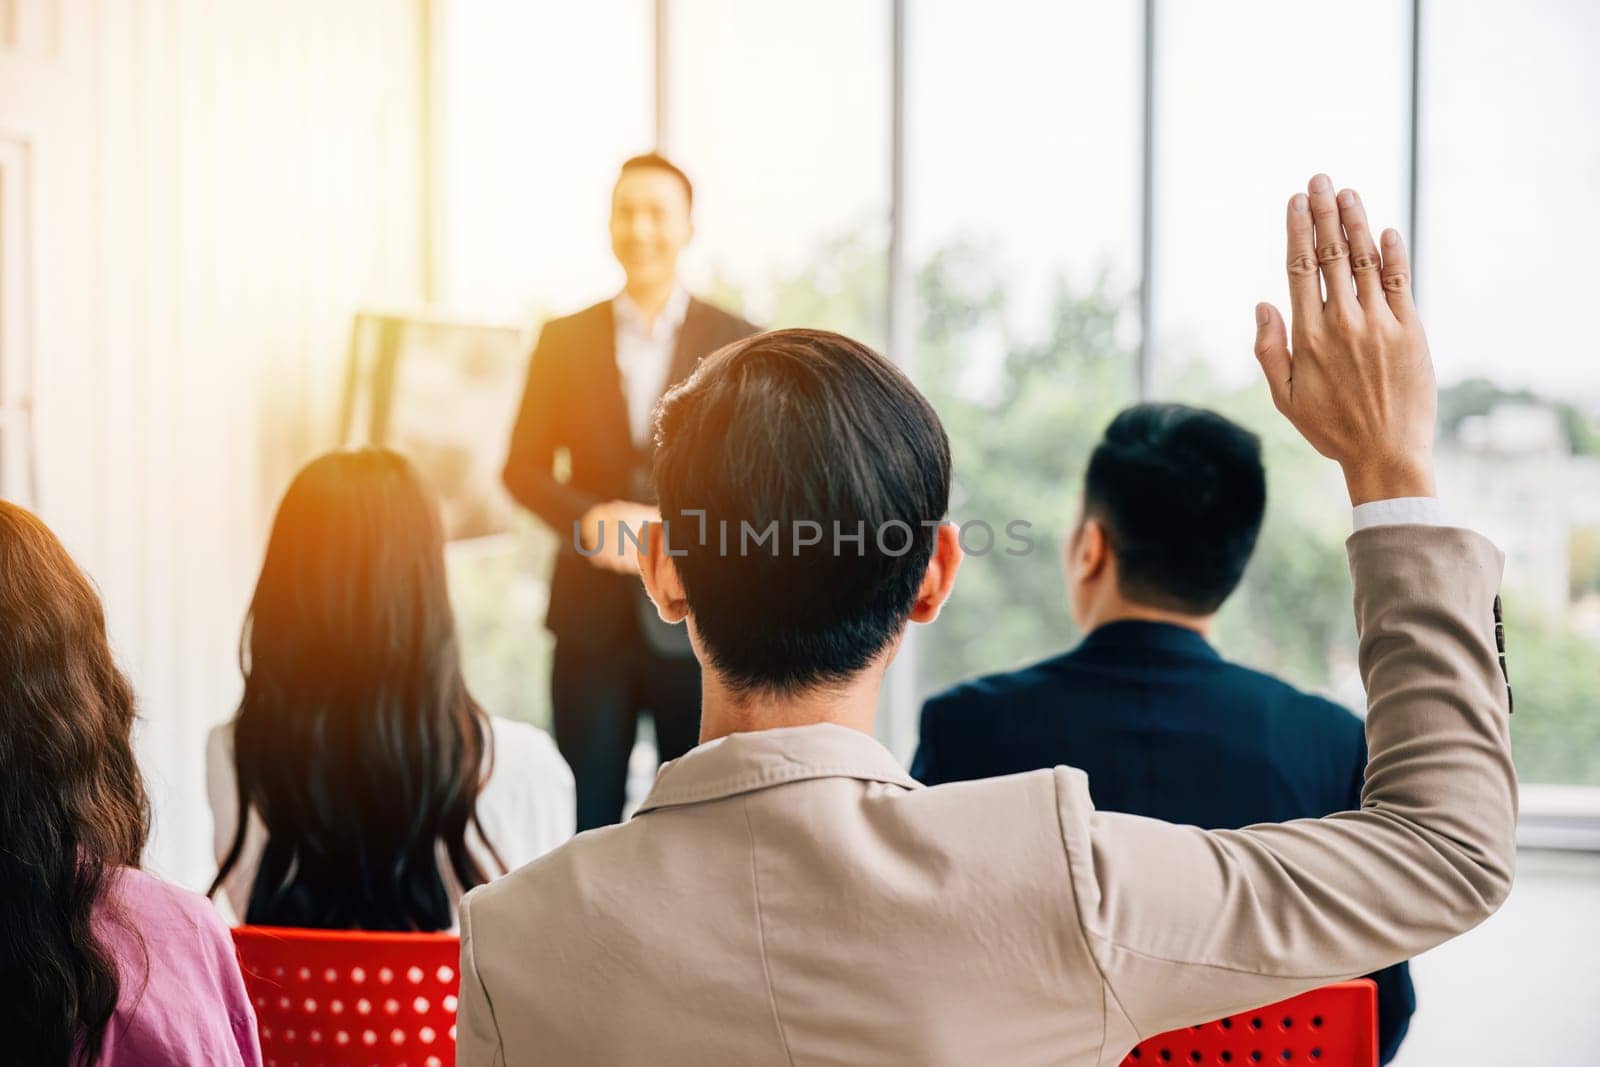 Audience engagement at a conference as hands are raised for questions, emphasizing the interactive nature of the meeting. A diverse group collaborates at a workshop or seminar presentation.